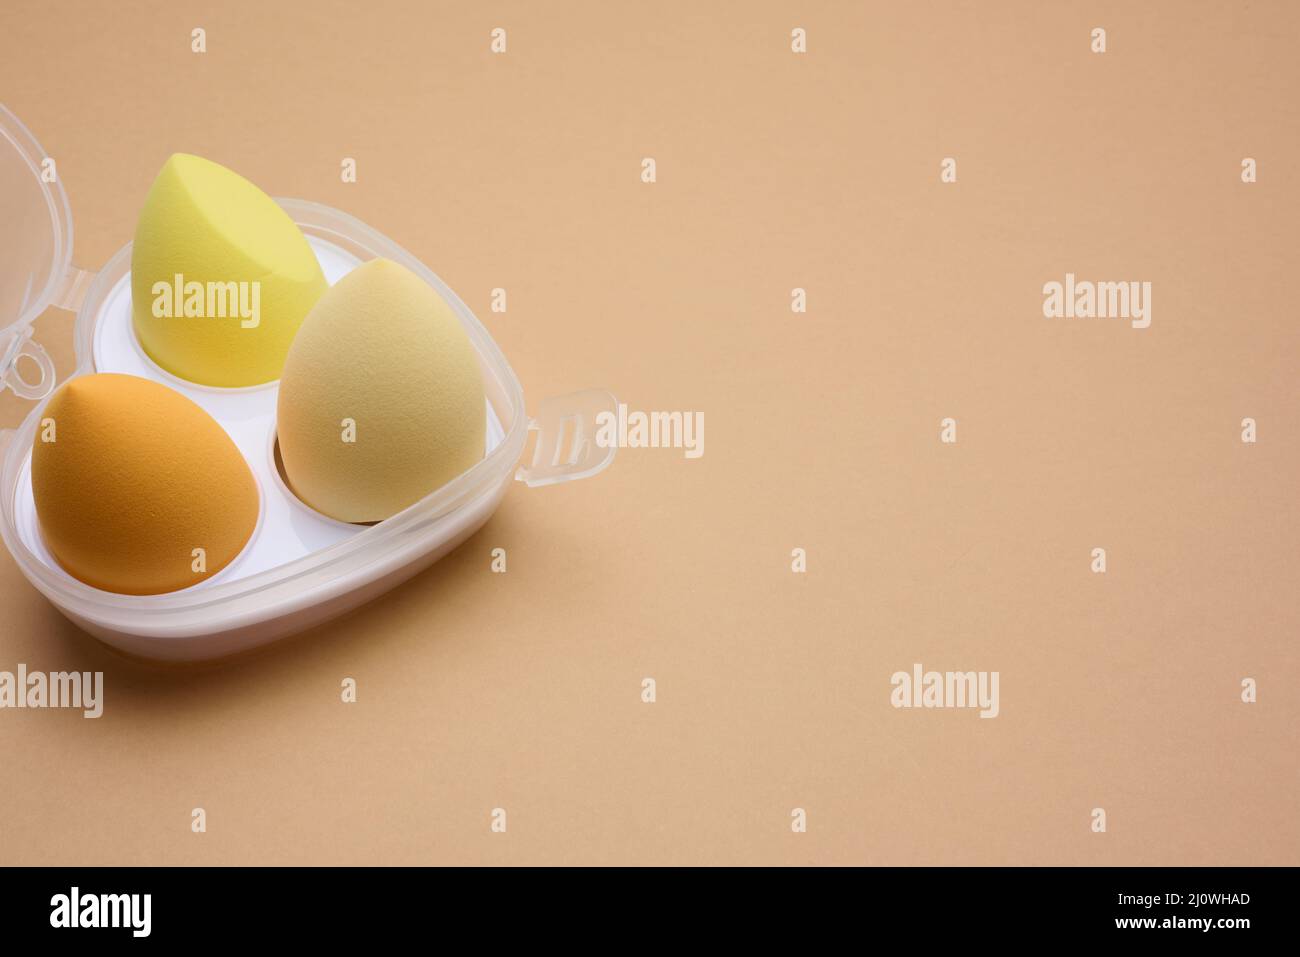 Oval new egg-shaped sponges for cosmetics and foundation, top view Stock Photo